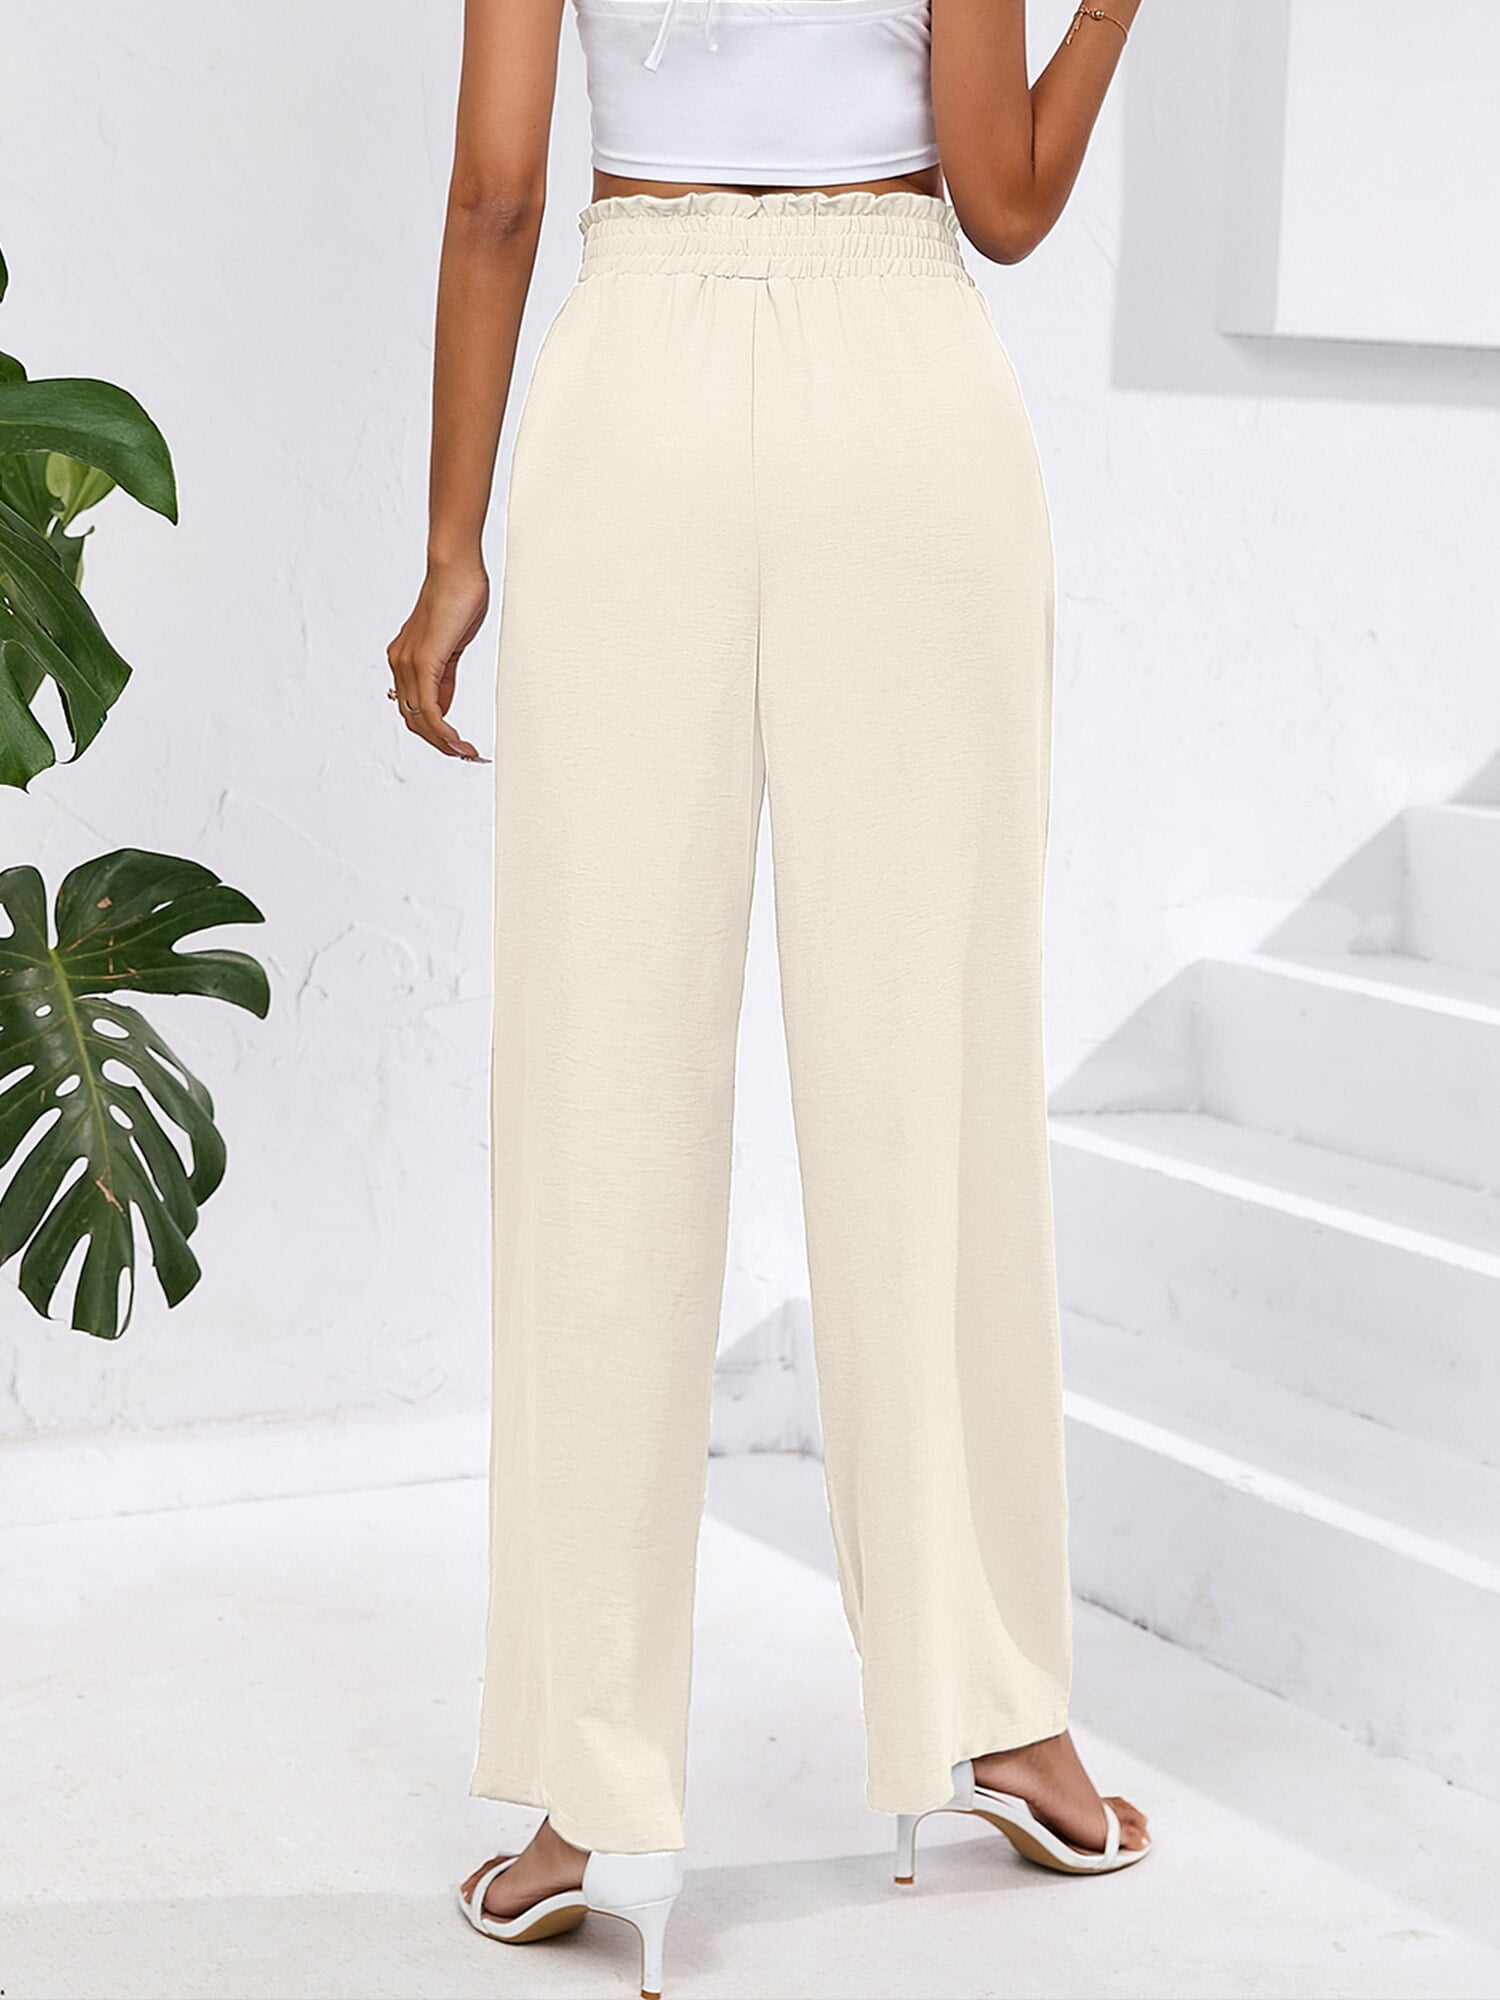 Chiclily Women's Wide Leg Pants with Pockets Lightweight High Waisted  Adjustable Tie Knot Loose Trousers Flowy Summer Beach Lounge Pants, US Size